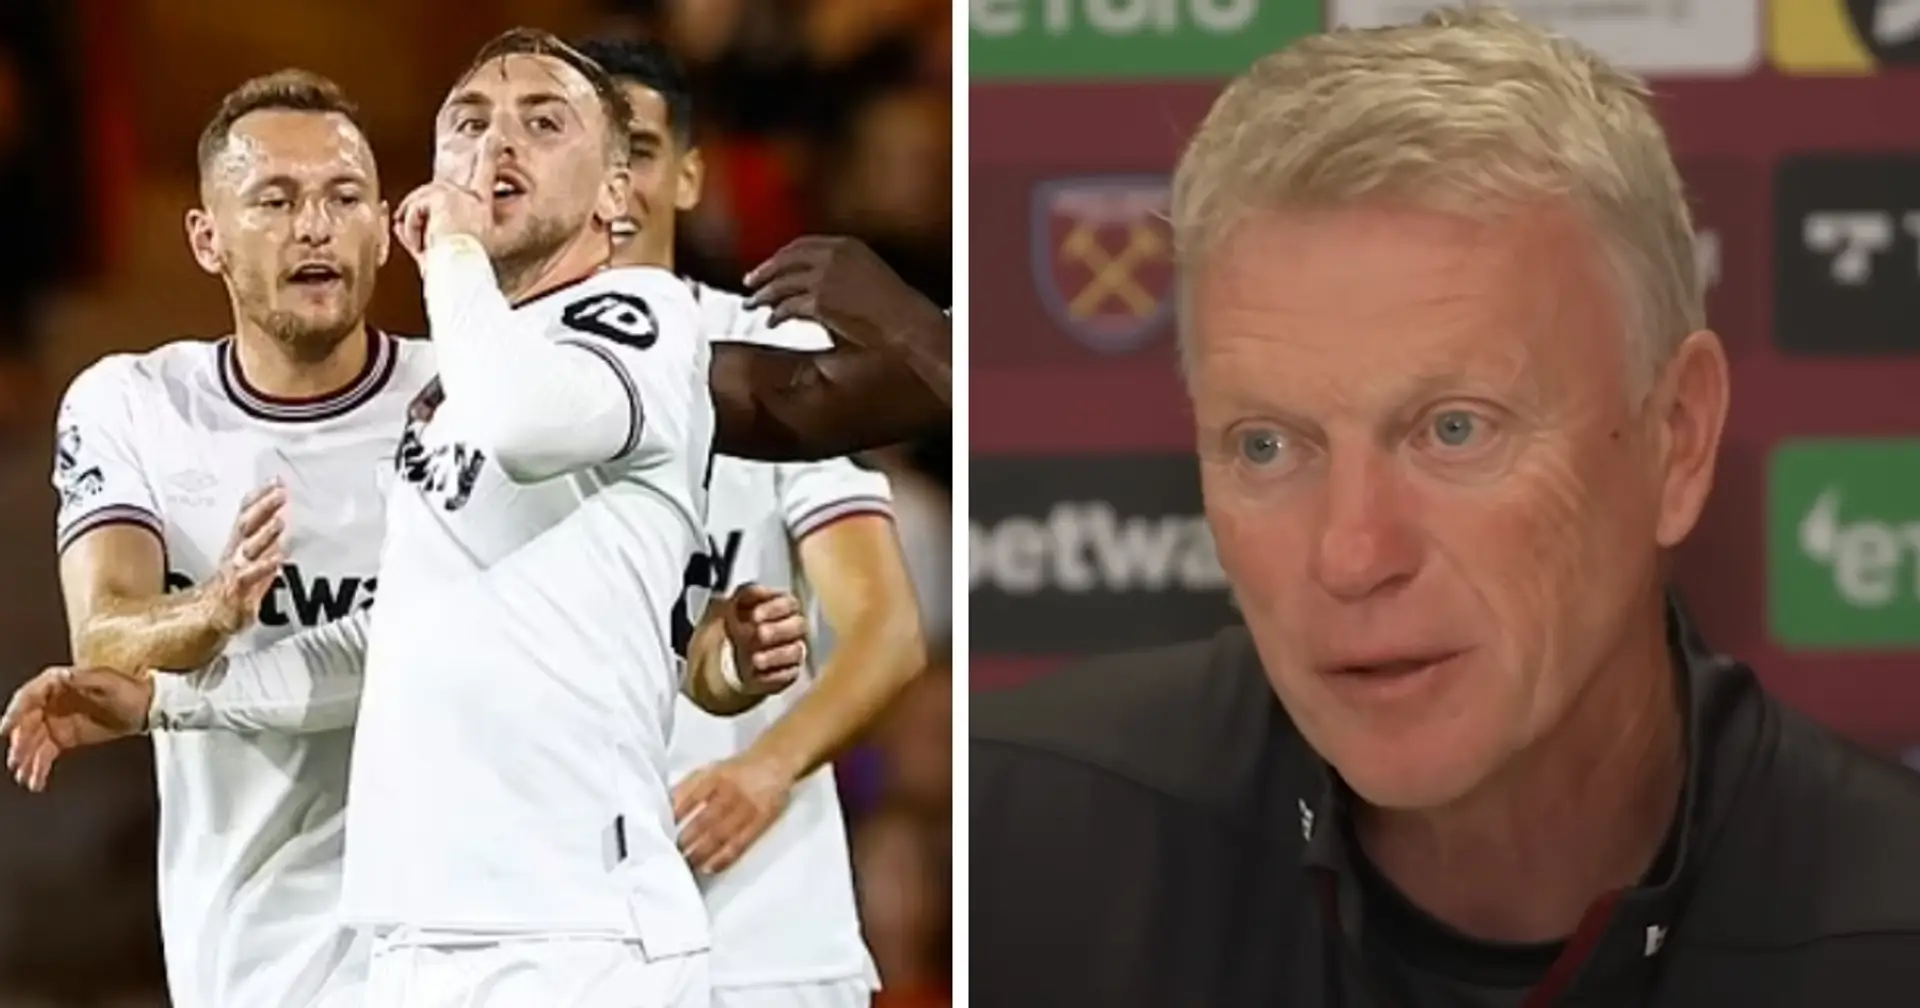 'You go and you score': David Moyes praises Jarrod Bowen for his reaction to foul chants directed at his girlfriend 